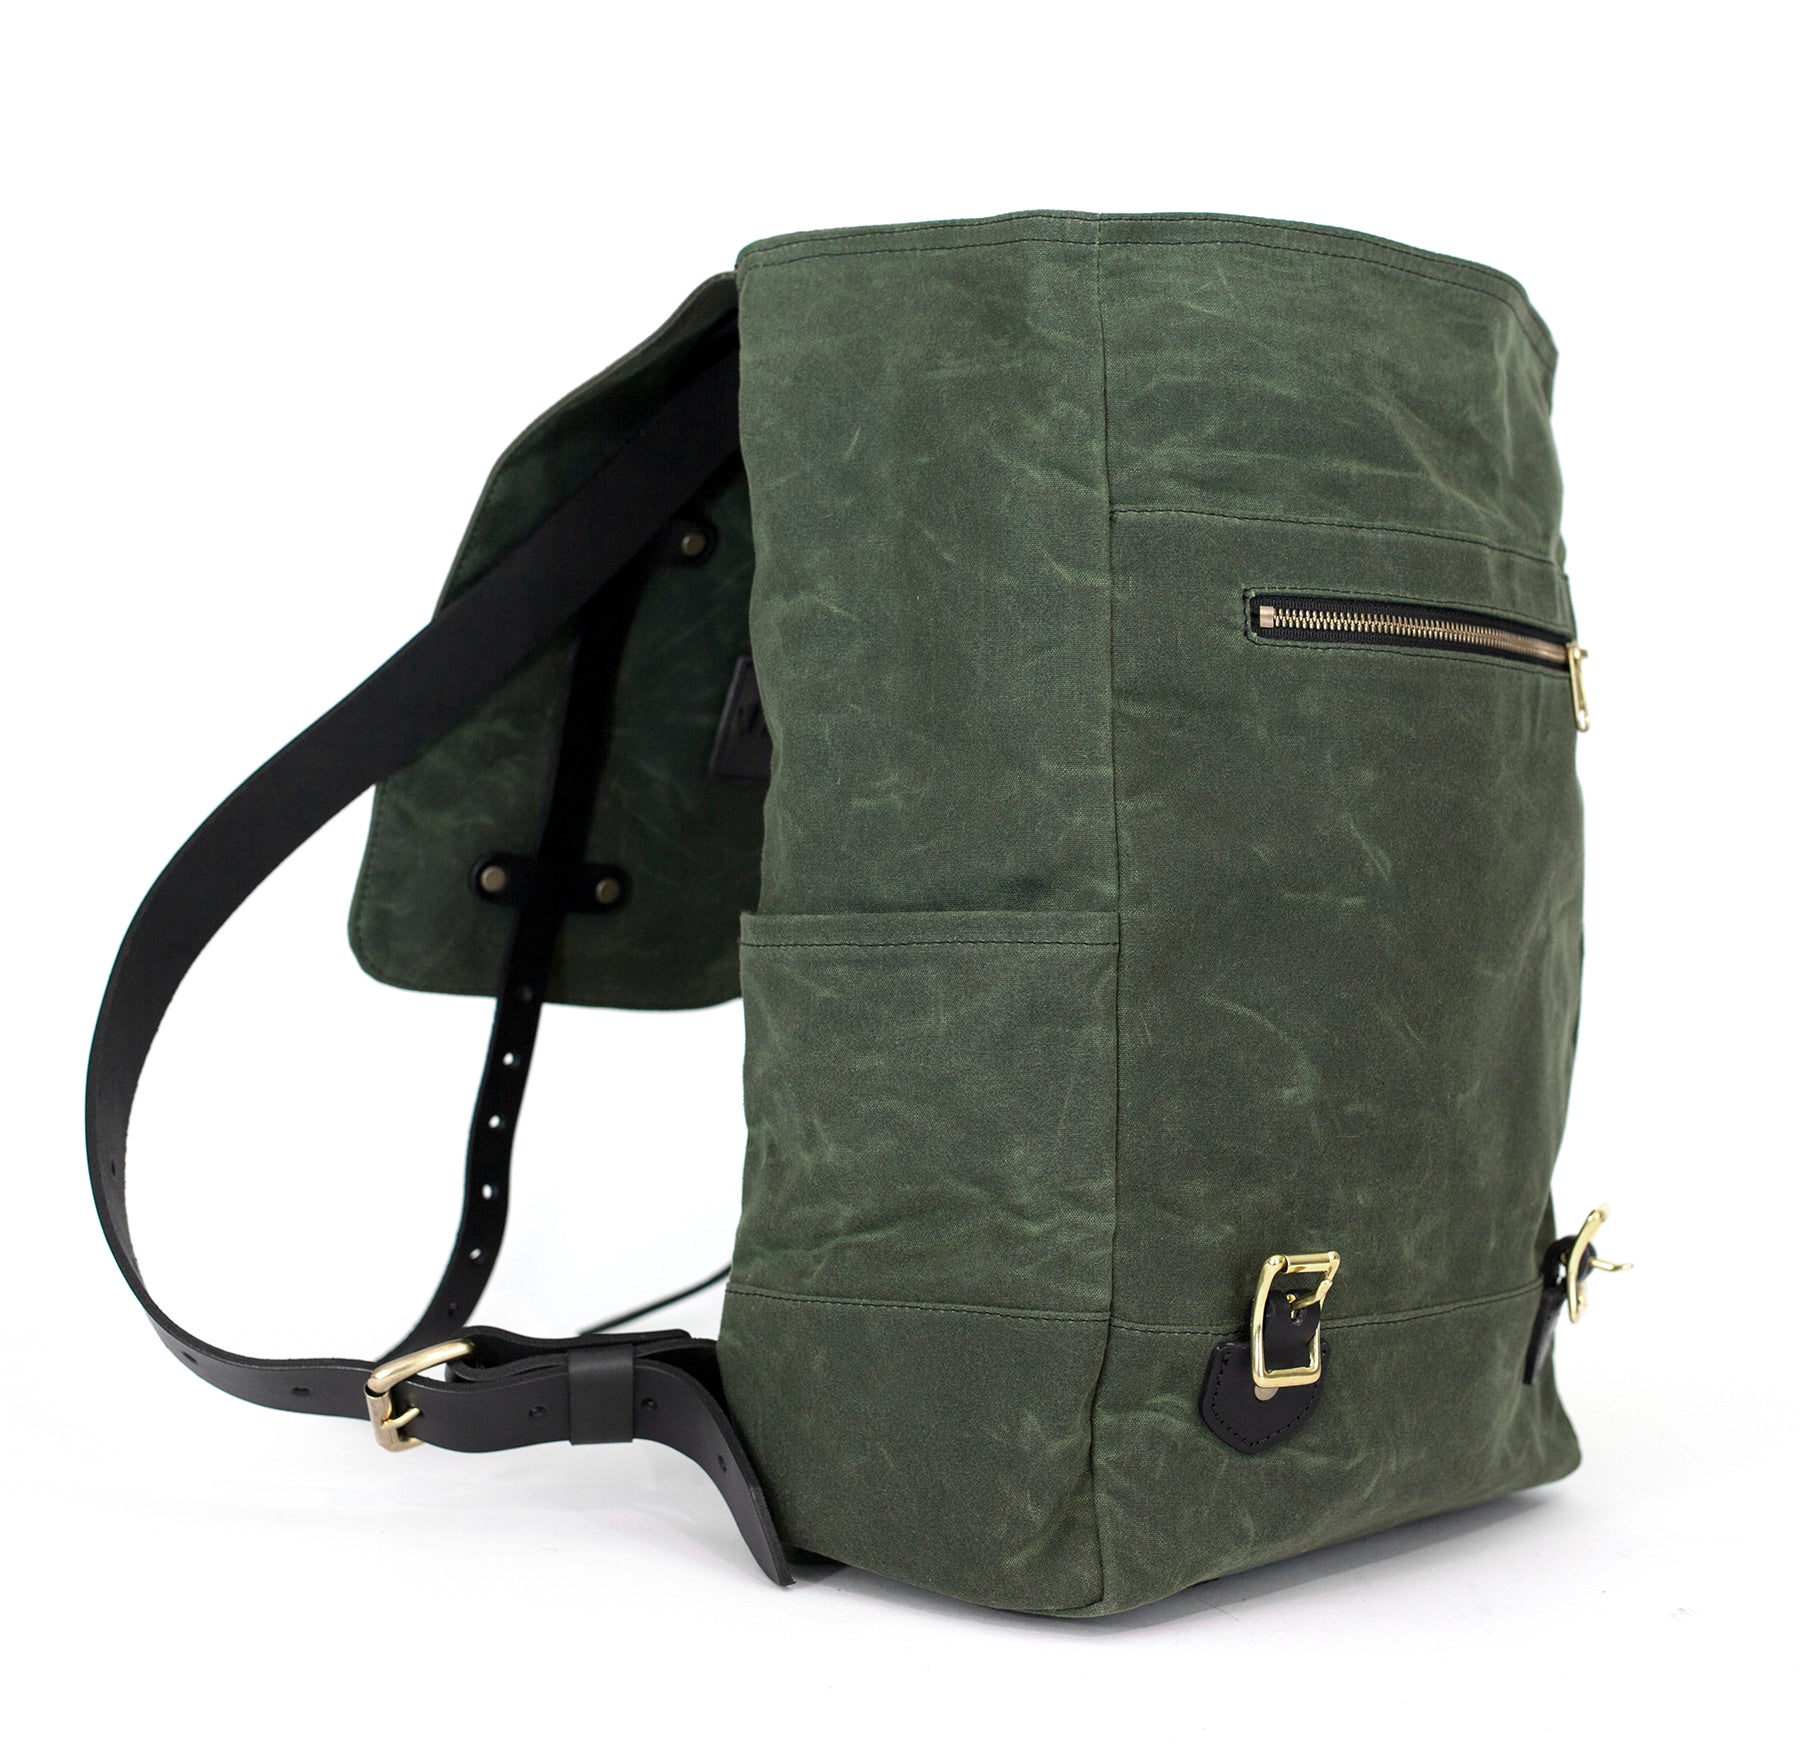 The Catamount Backpack - Black / Brown - Red Clouds Collective